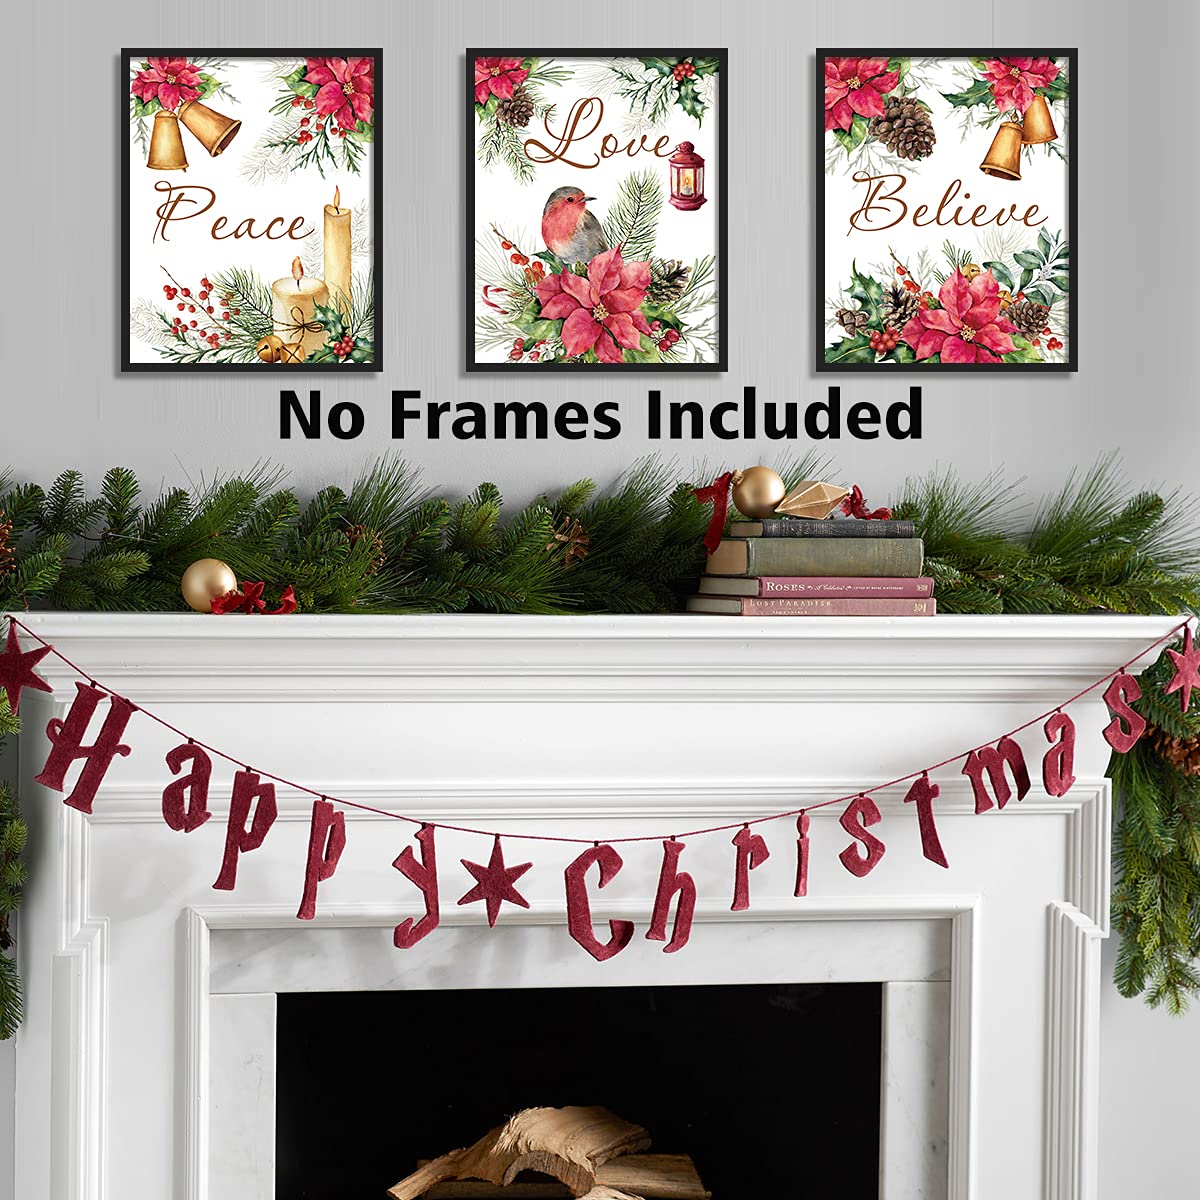 HLNIUC Jingle Bell Christmas Canvas art print,Vintage Xmas lettering Wall Art (4pcs, 8”X10”, Unframed),Red Poinsettia Flowers Poster For Bedroom Holiday Party Decor